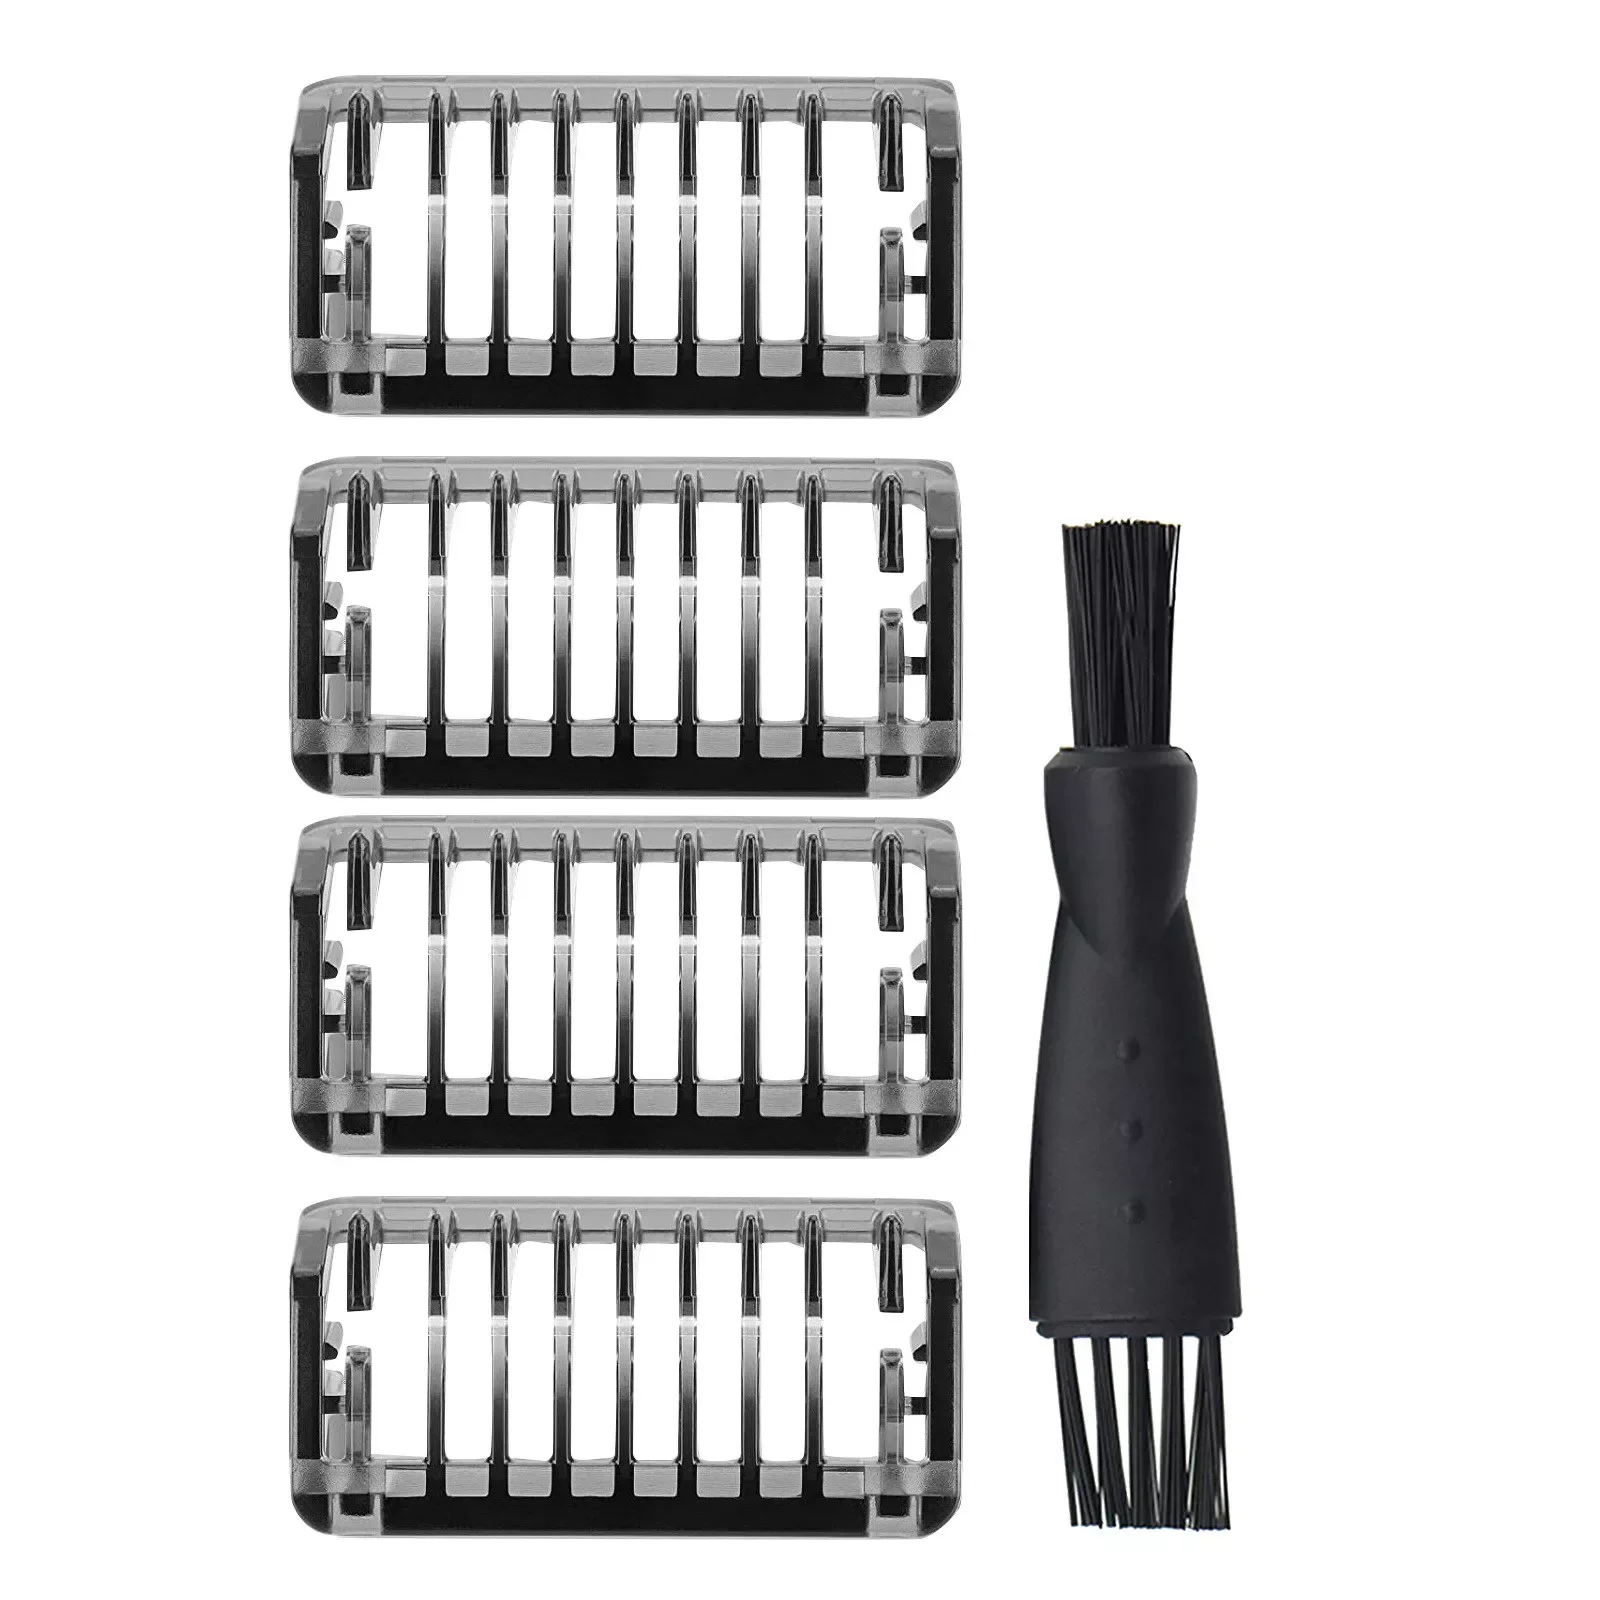 

5 Pack 1 2 3 5mm Guide Comb for Philips Norelco OneBlade Comb Cutting,QP210/50 QP 220 2523 2520 2527 6520